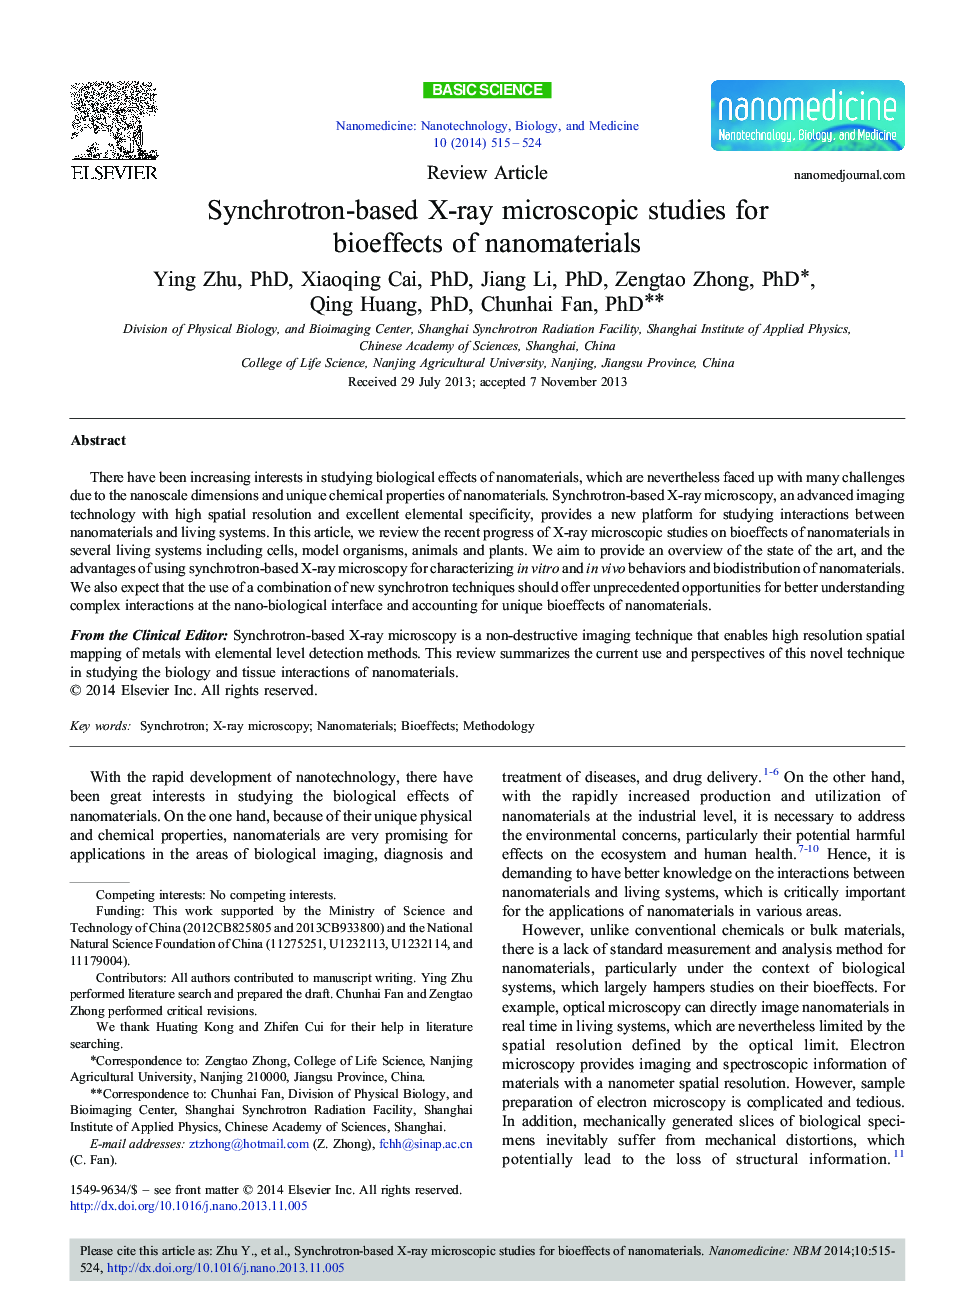 Synchrotron-based X-ray microscopic studies for bioeffects of nanomaterials 